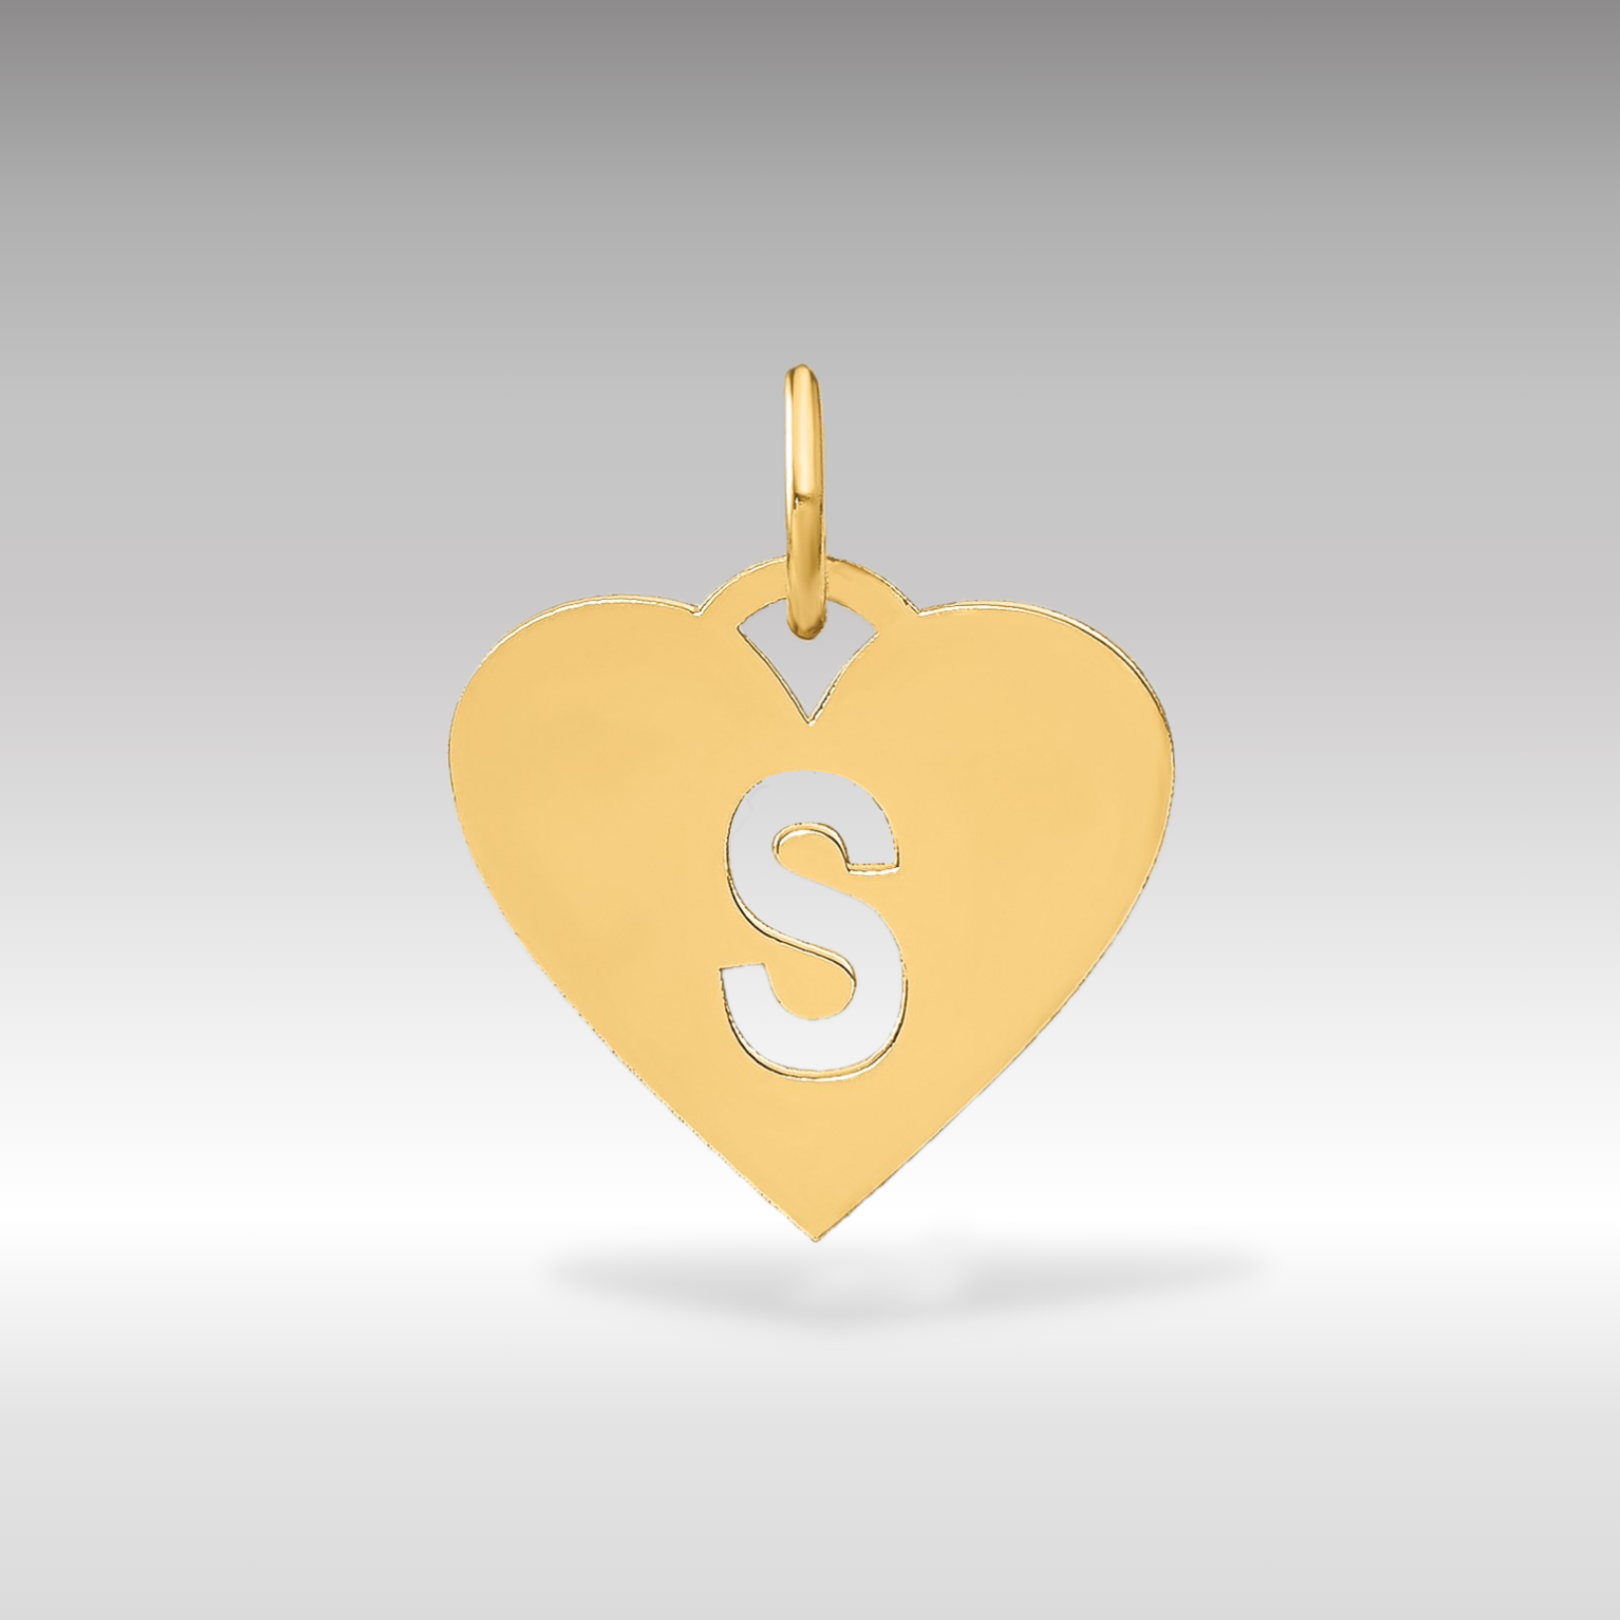 14K Gold Heart Pendant with Letter 'S' - Charlie & Co. Jewelry